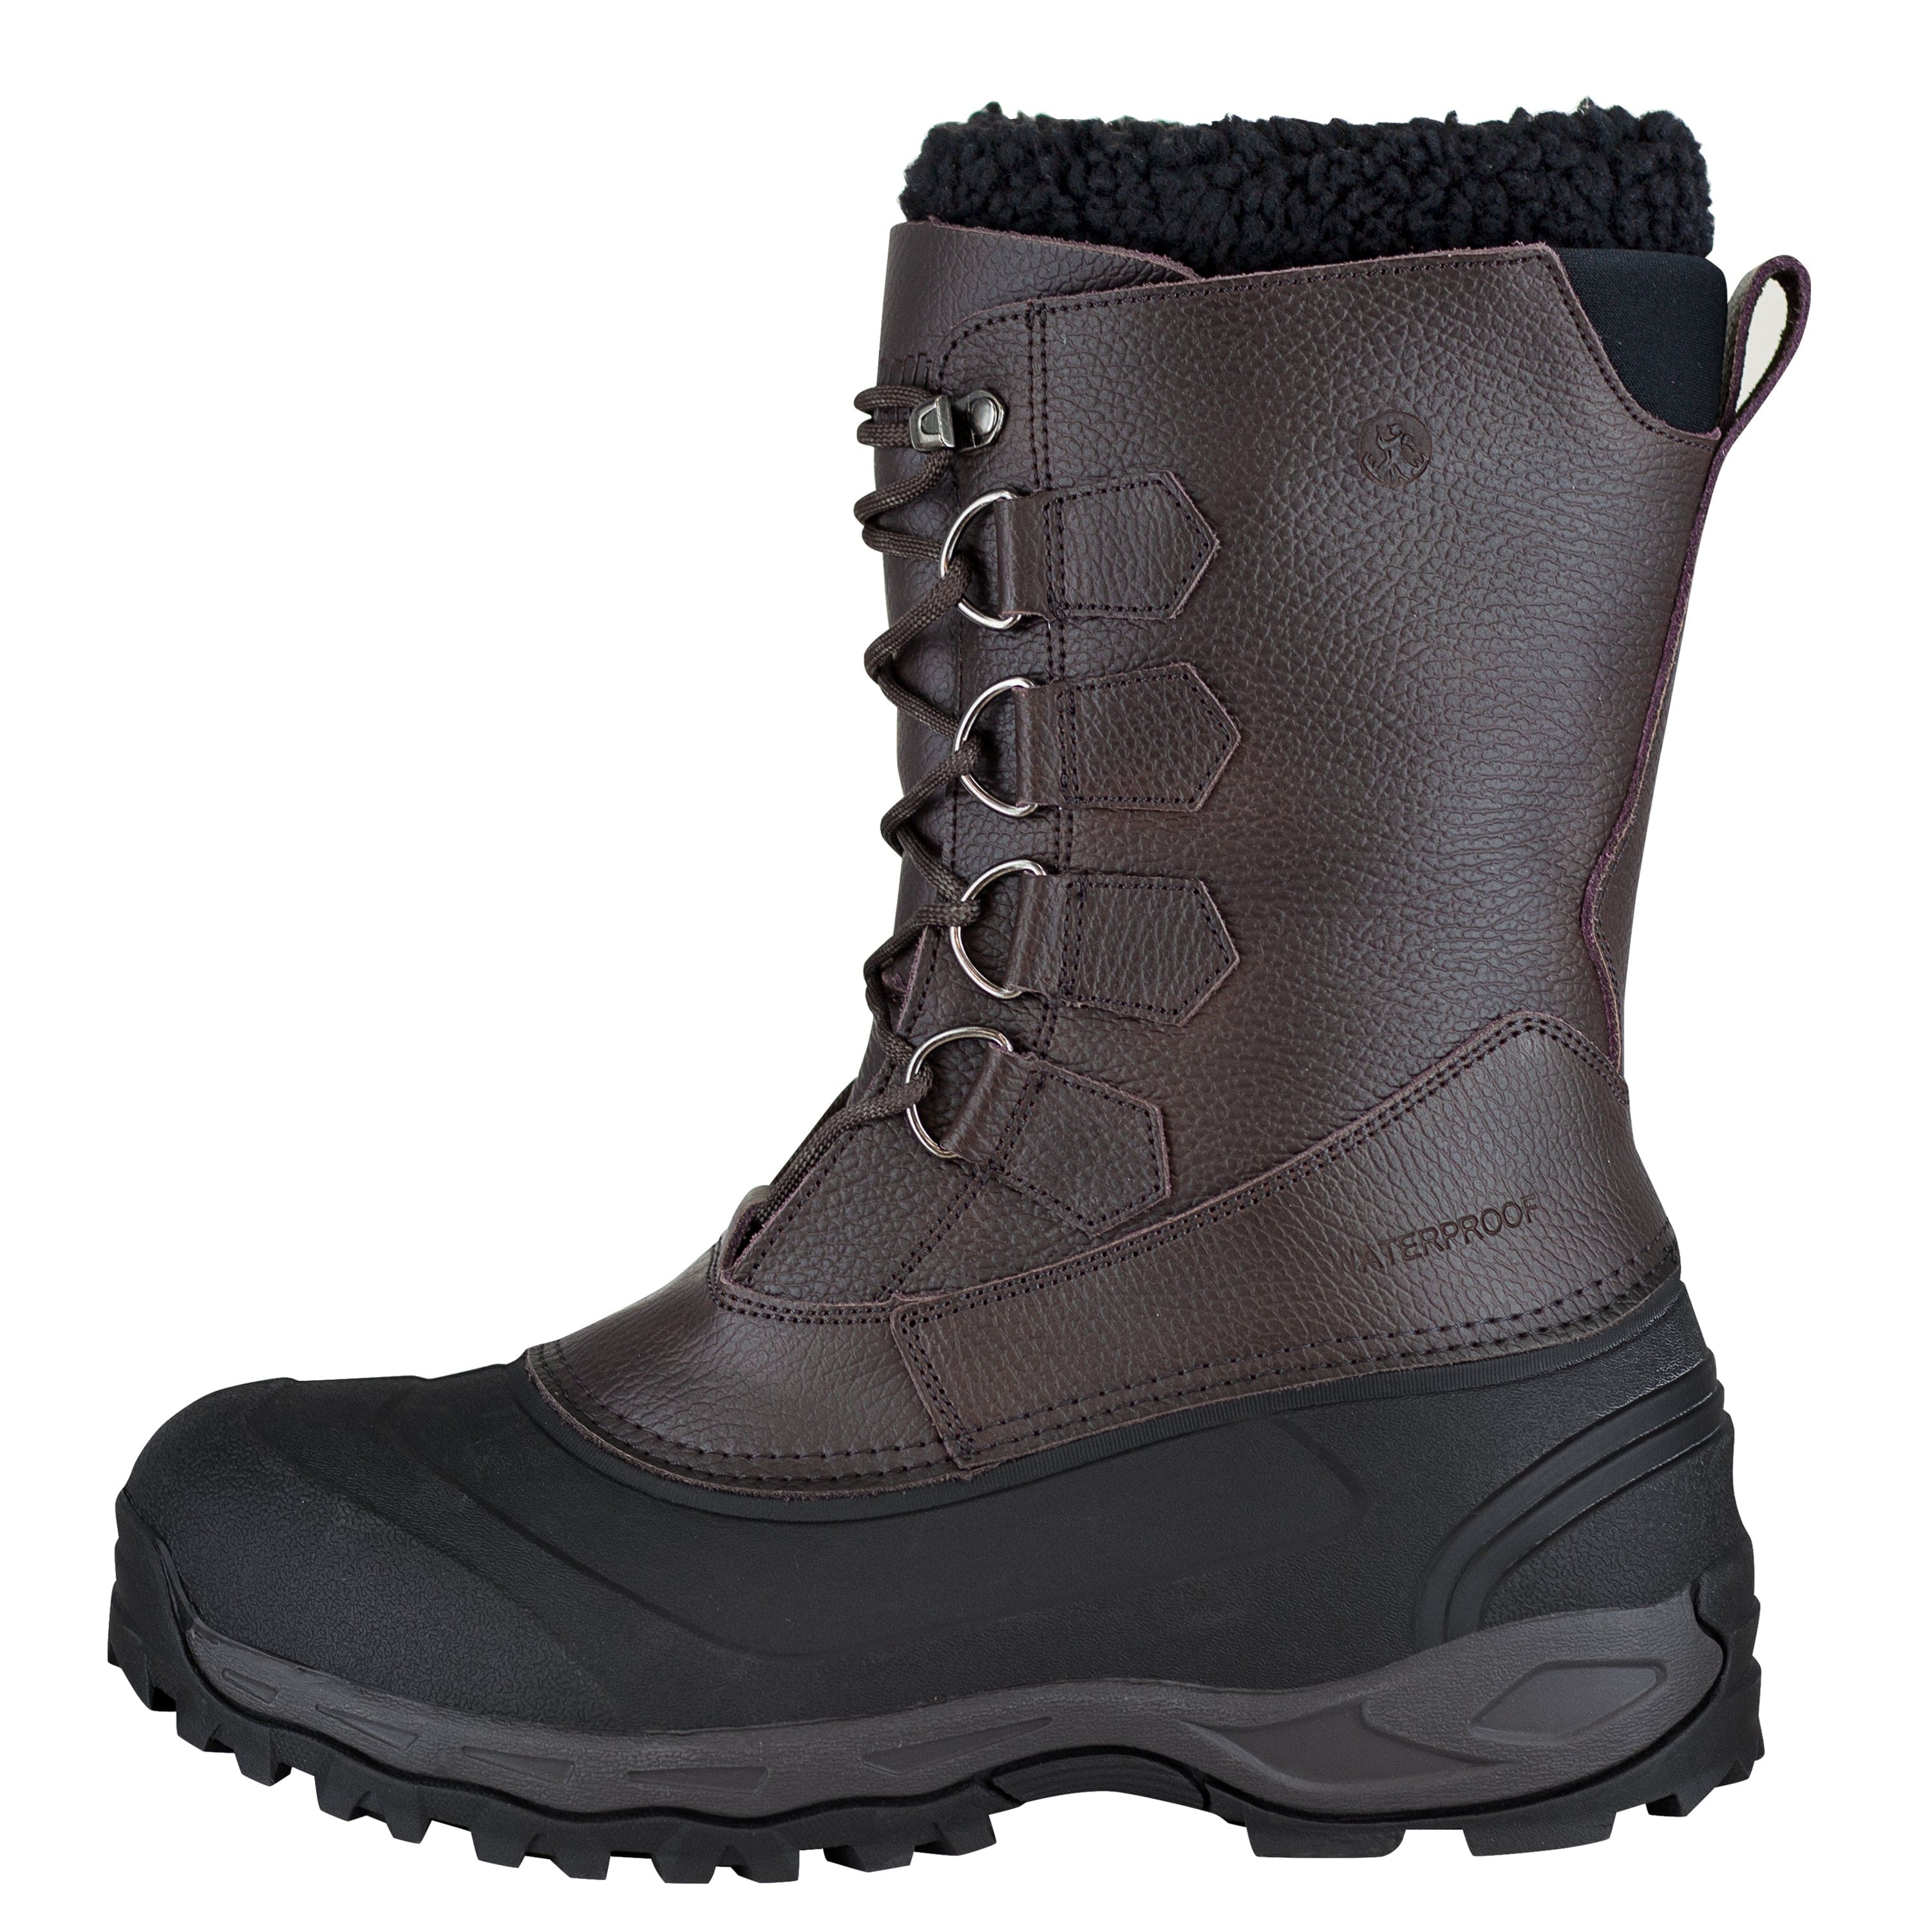 Mens Smokey Point Waterproof Leather Snow Boot - Northside USA